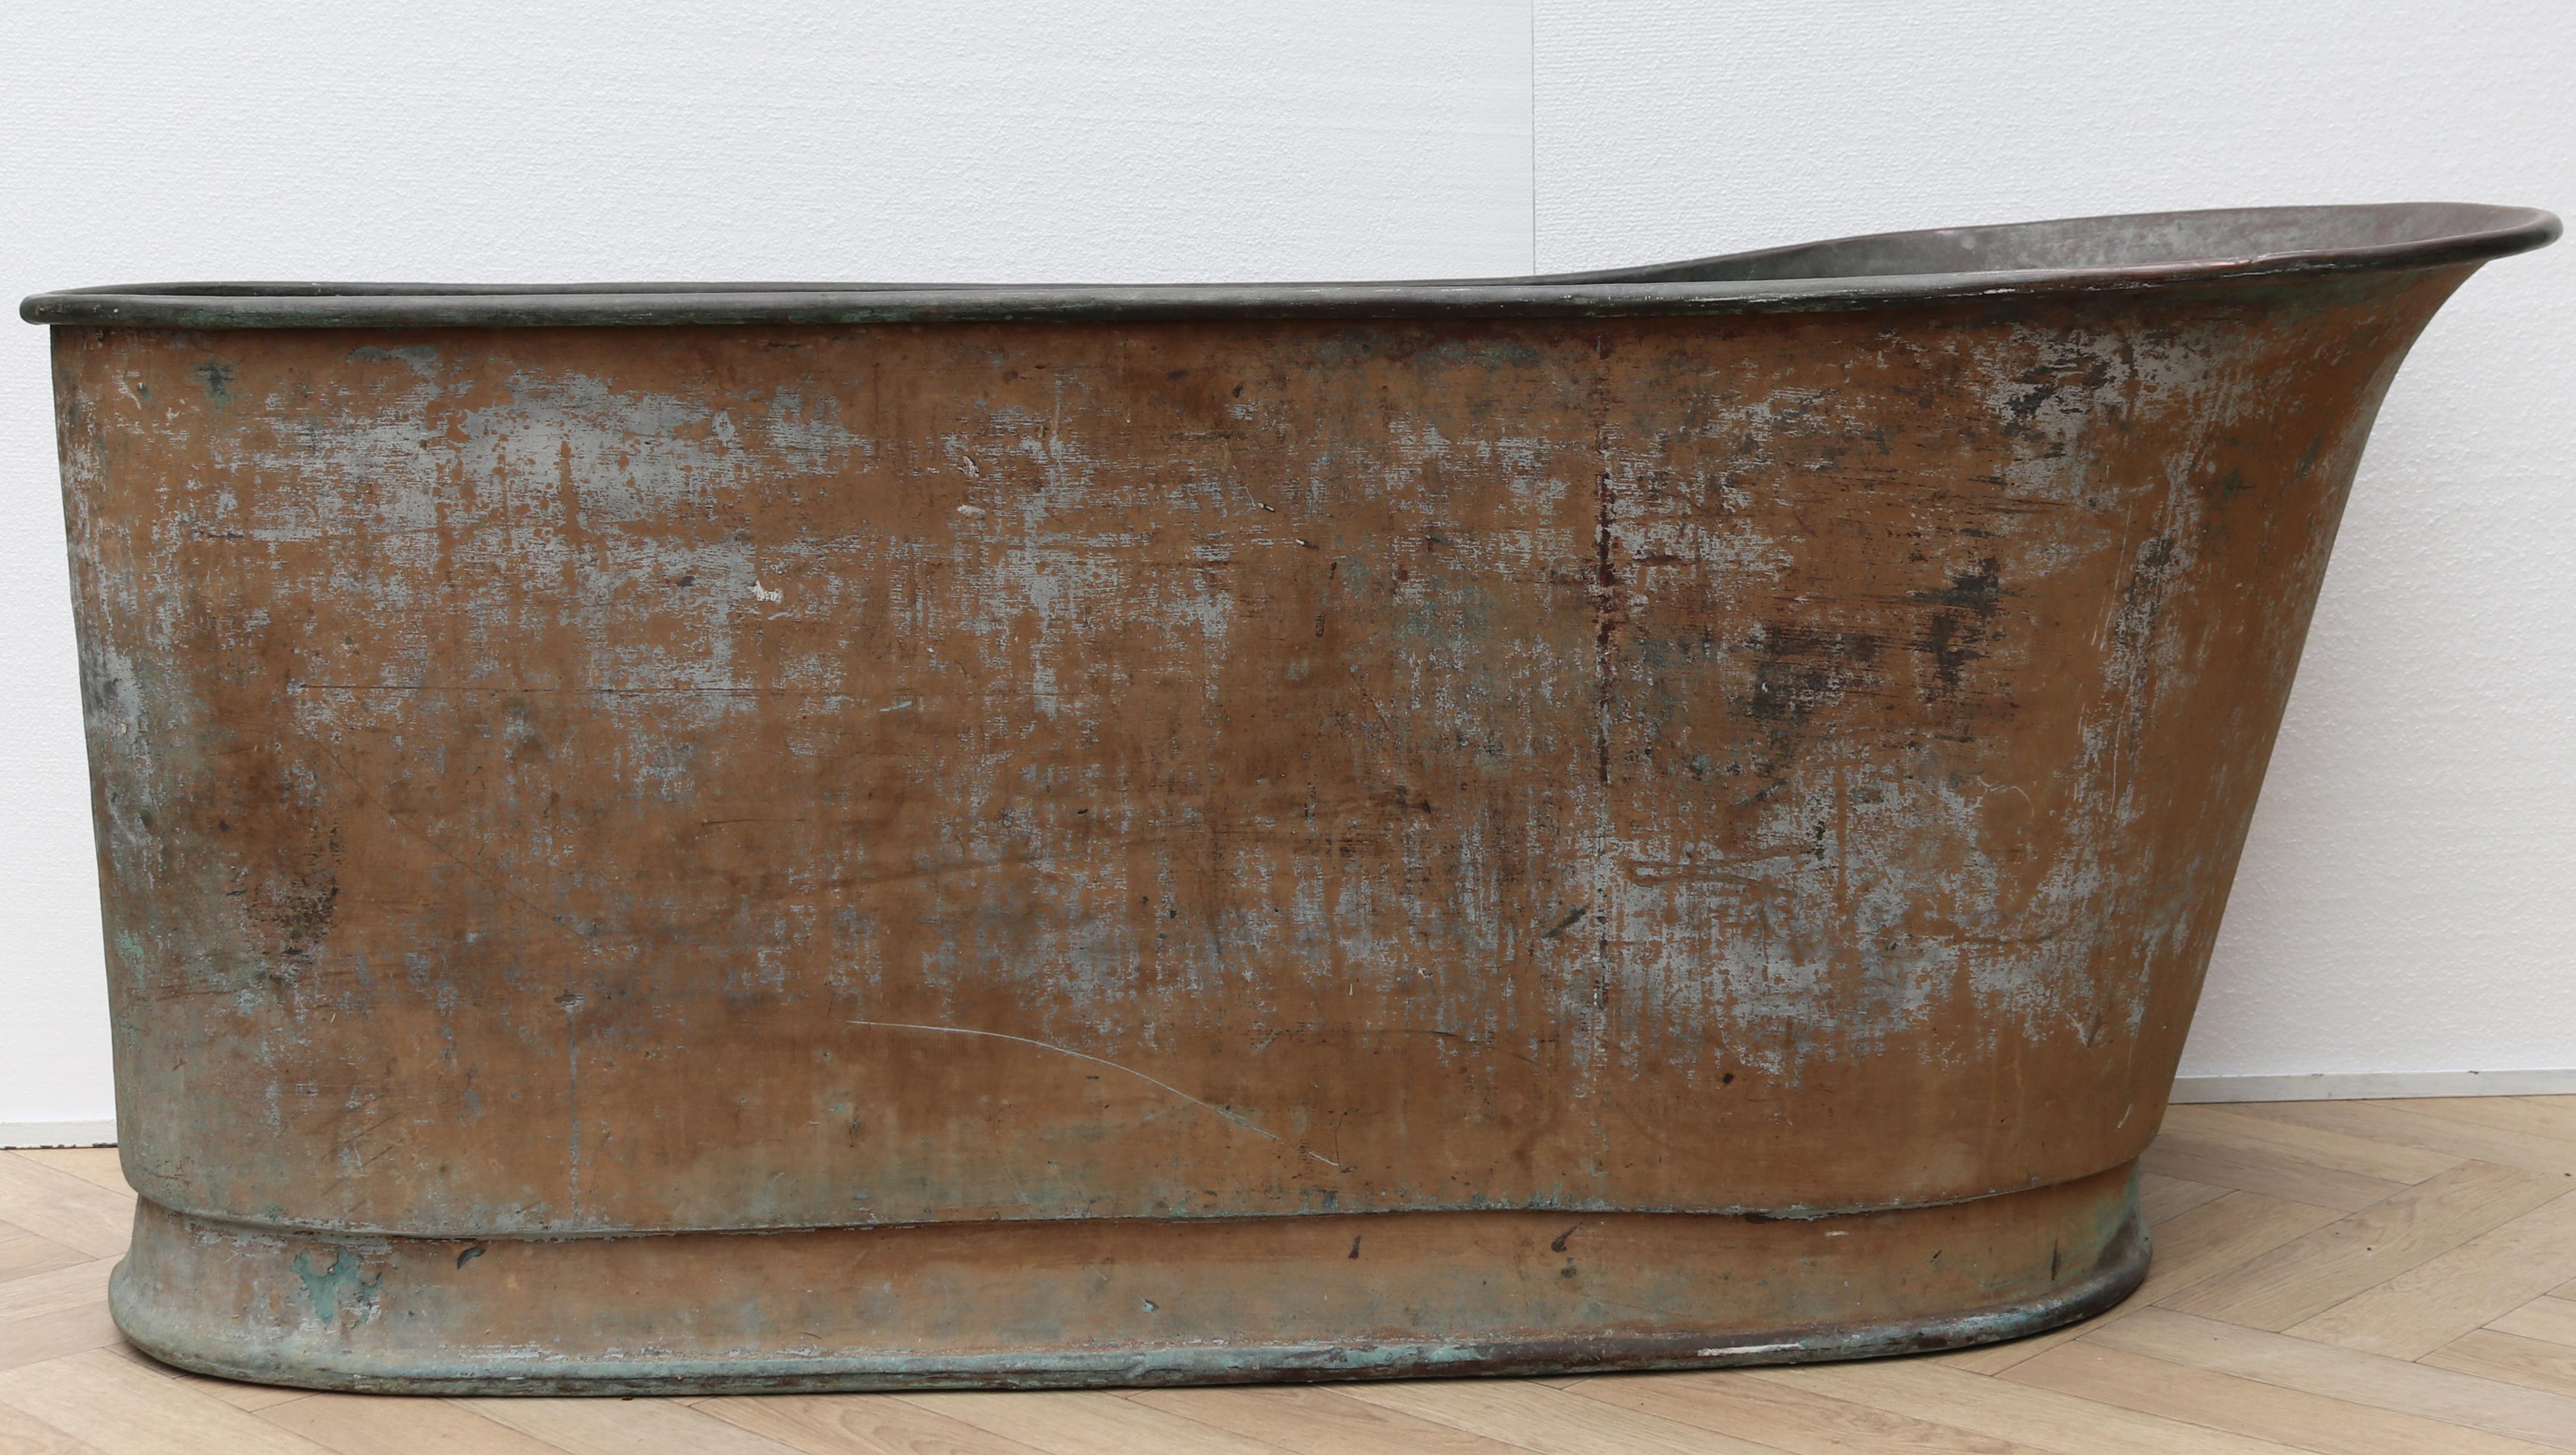 A large antique copper bathtub with a weathered verdigris and old paint finish.